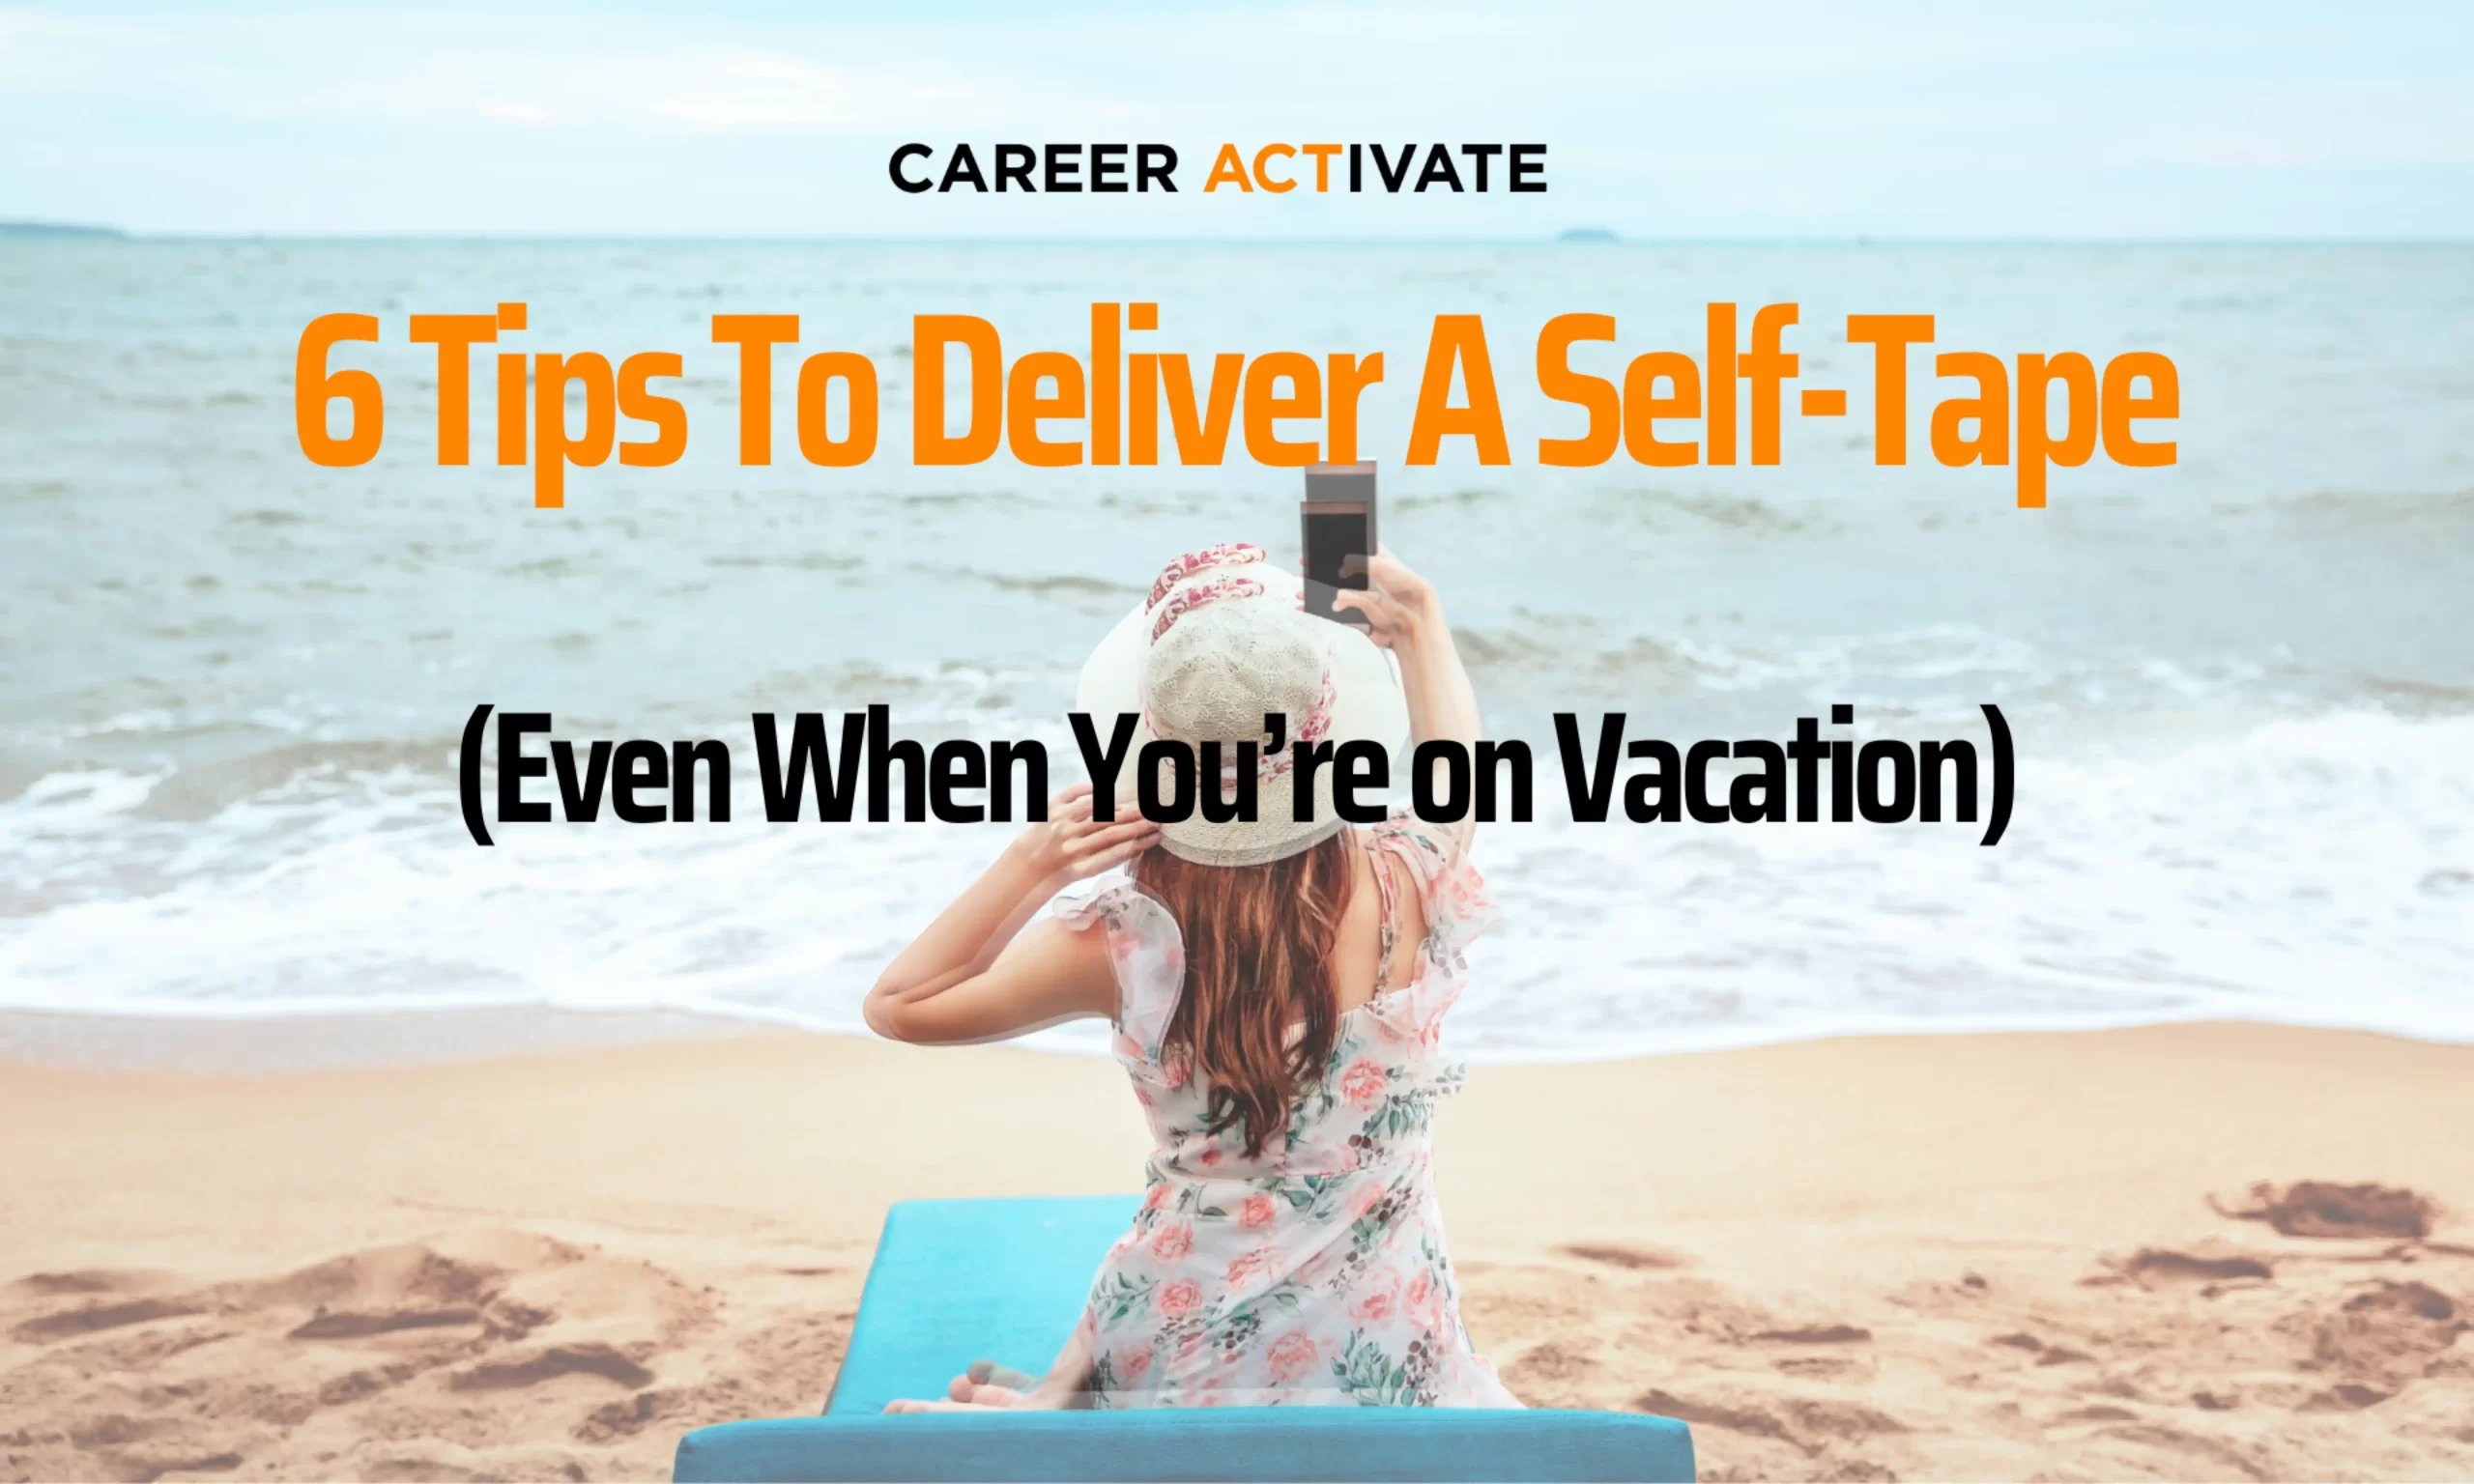 6 Tips To Deliver A Self-Tape (Even When You’re on Vacation)